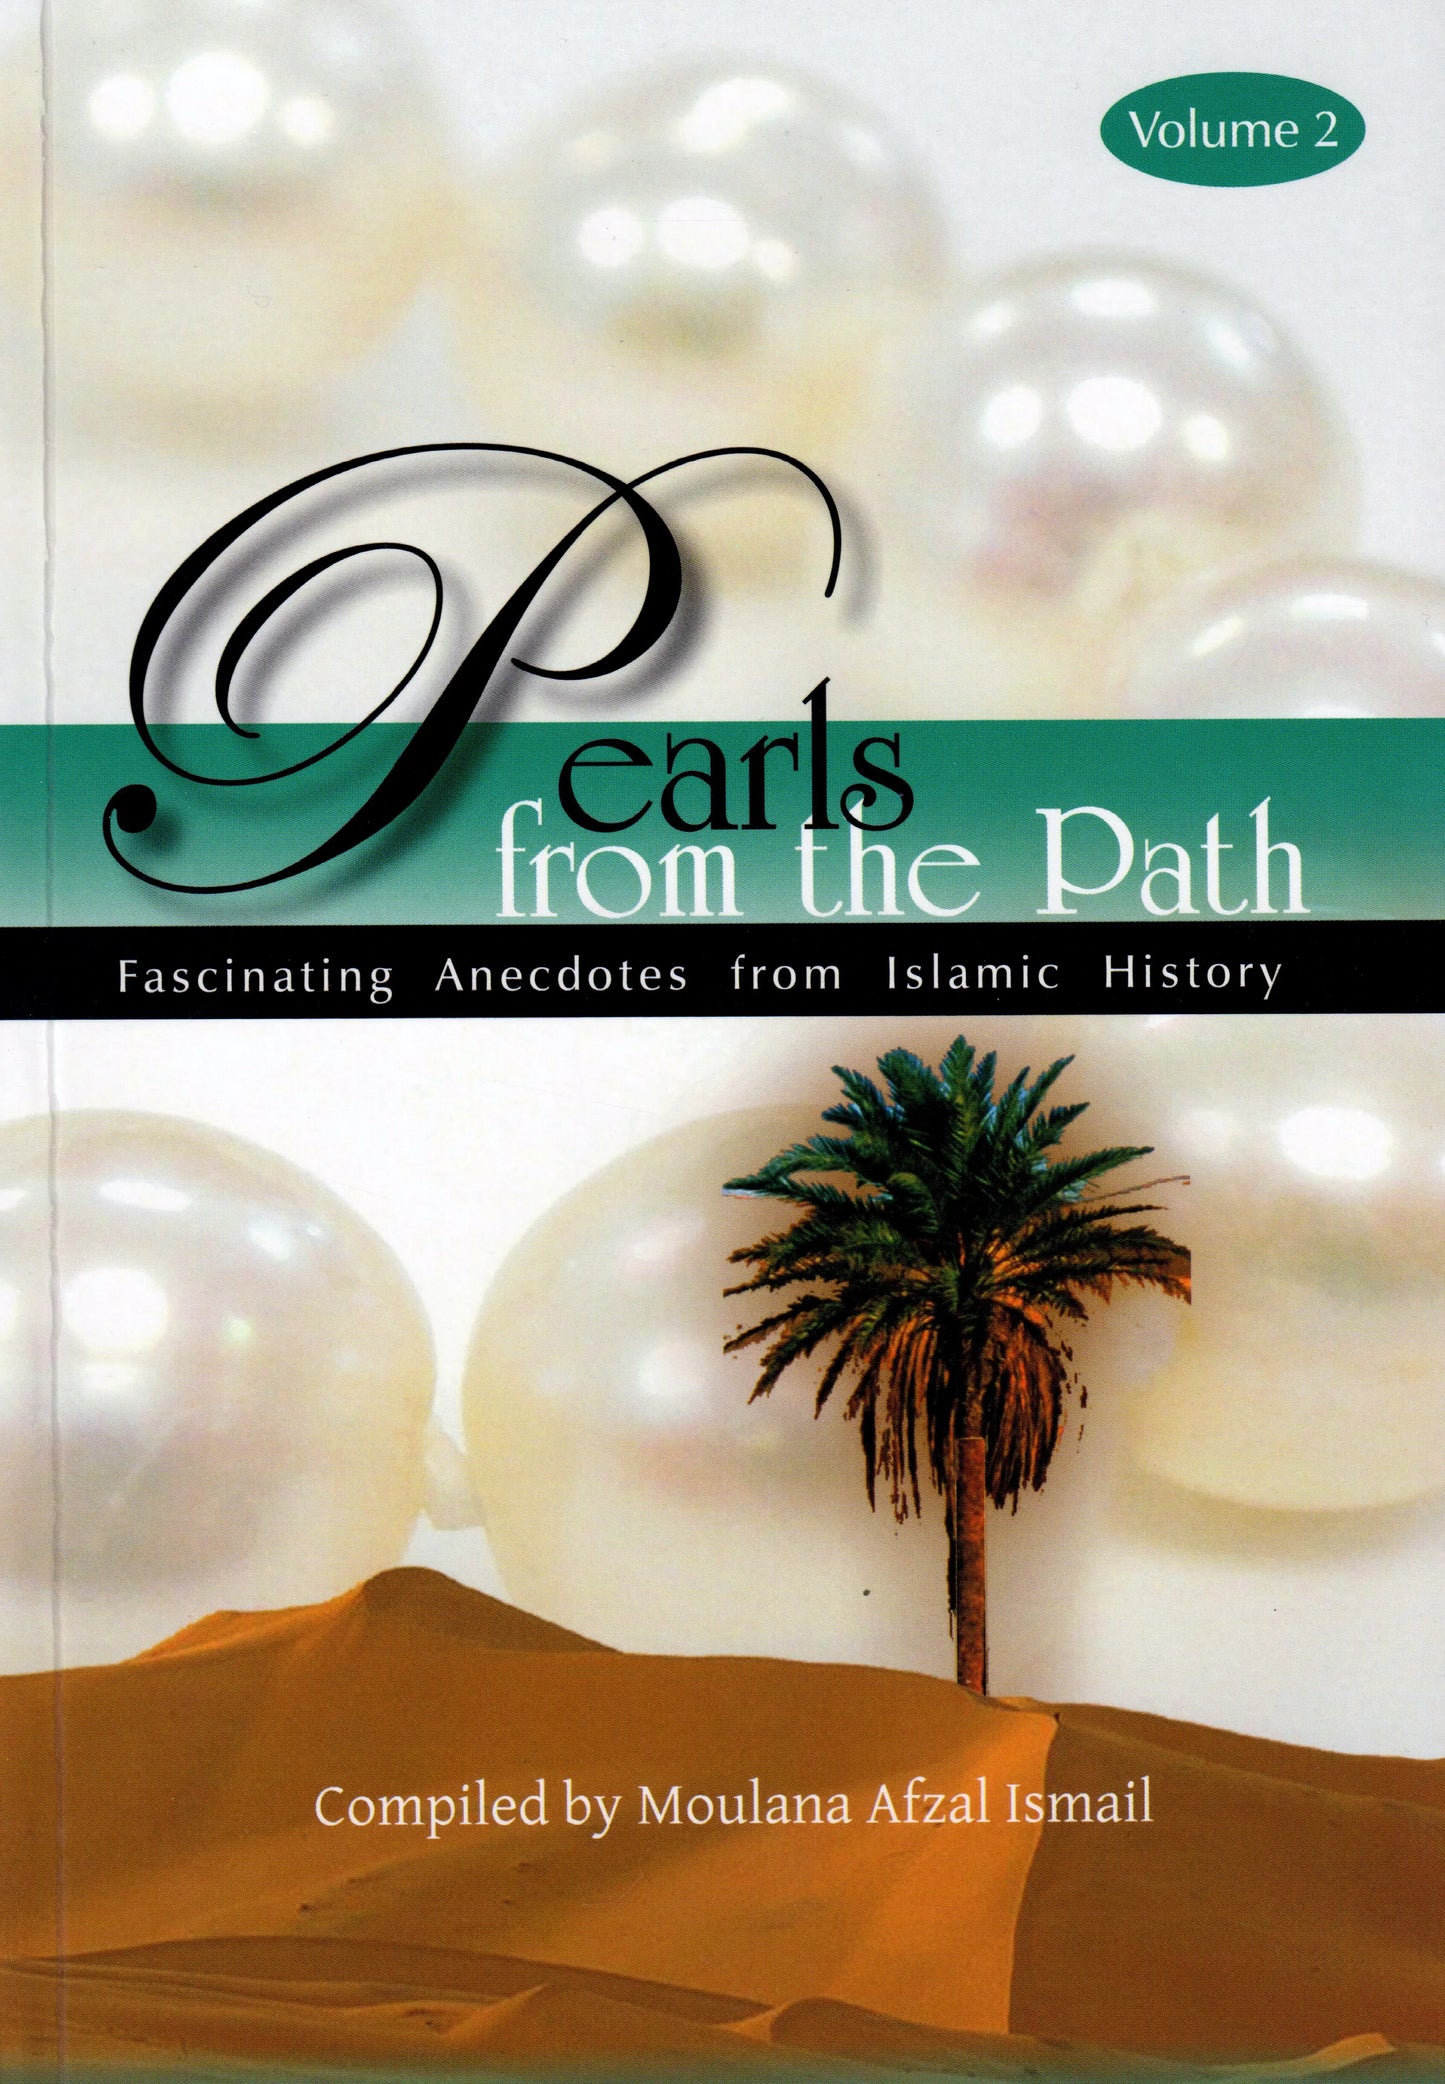 Pearls from the Path - Volume 2 Muslims at Work Publications